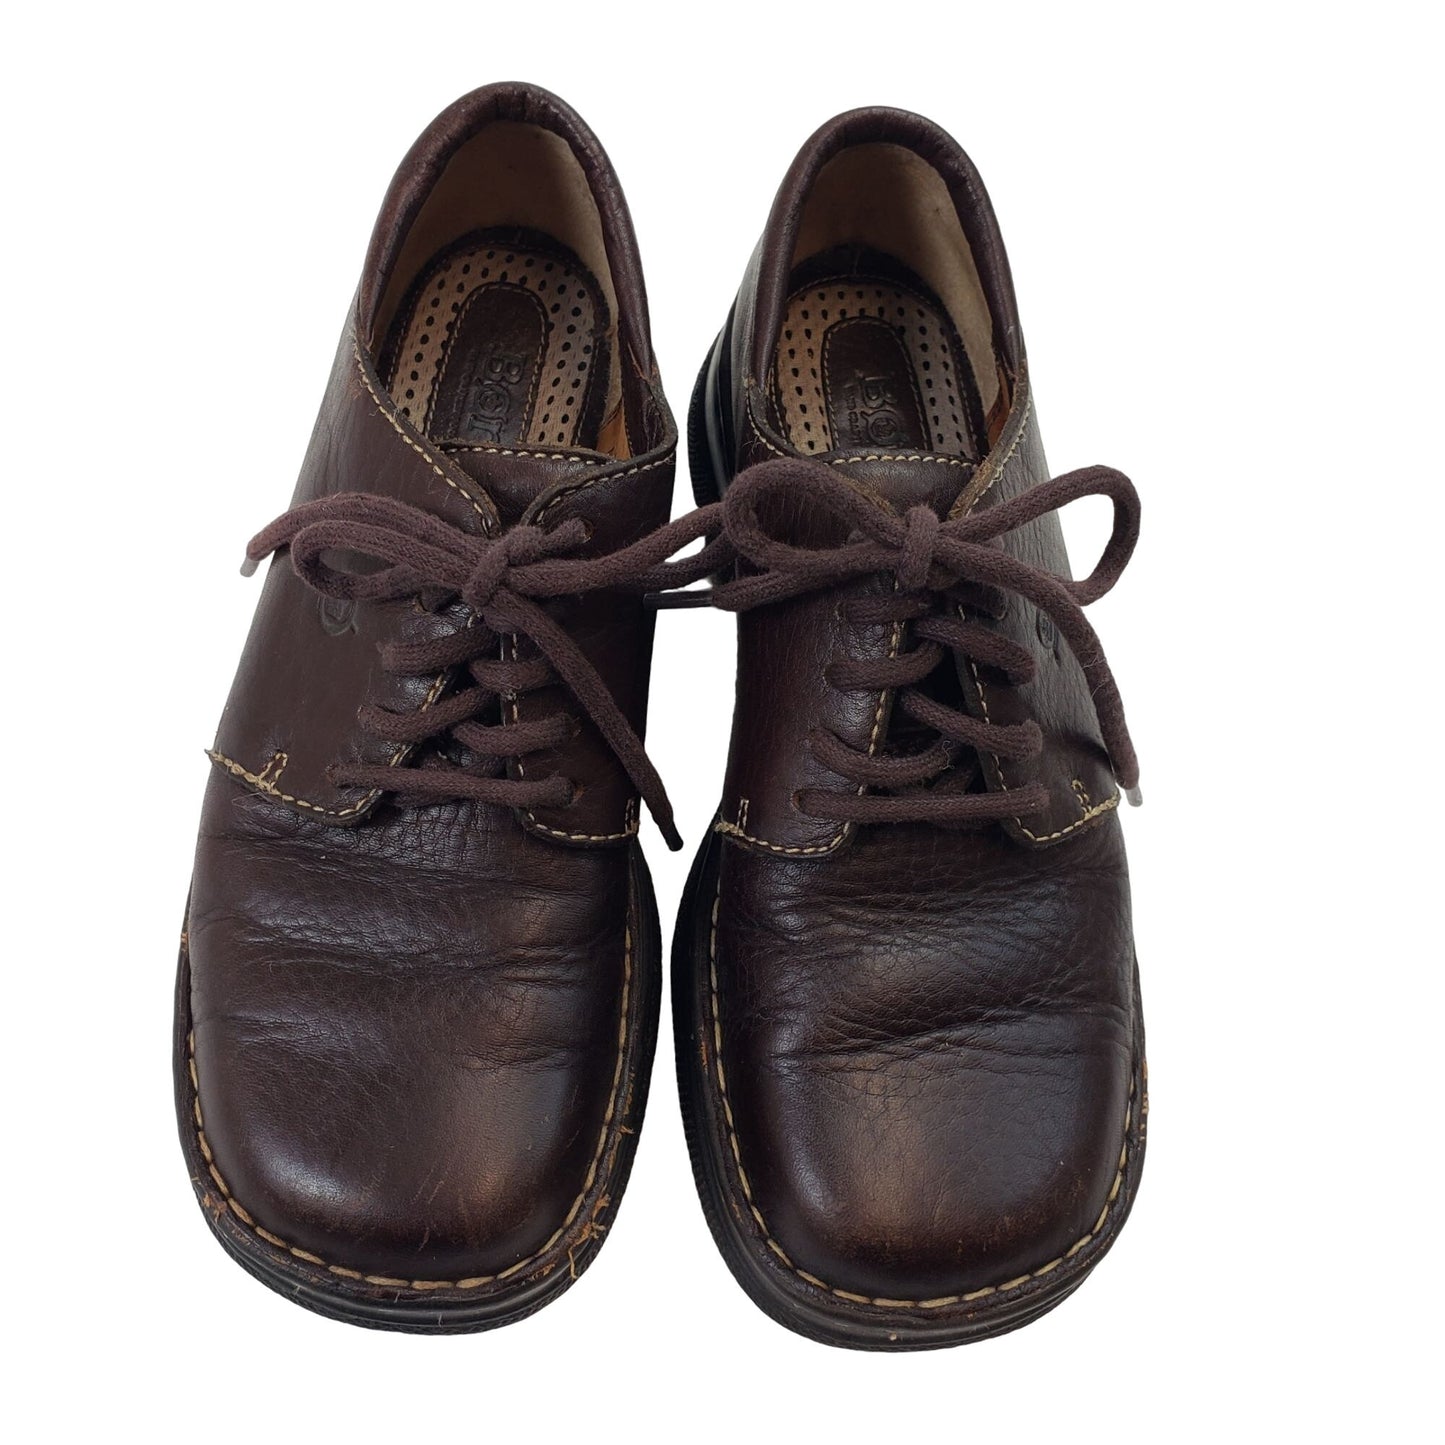 Born Classic Oxford Leather Lace-Up Shoes Size 6